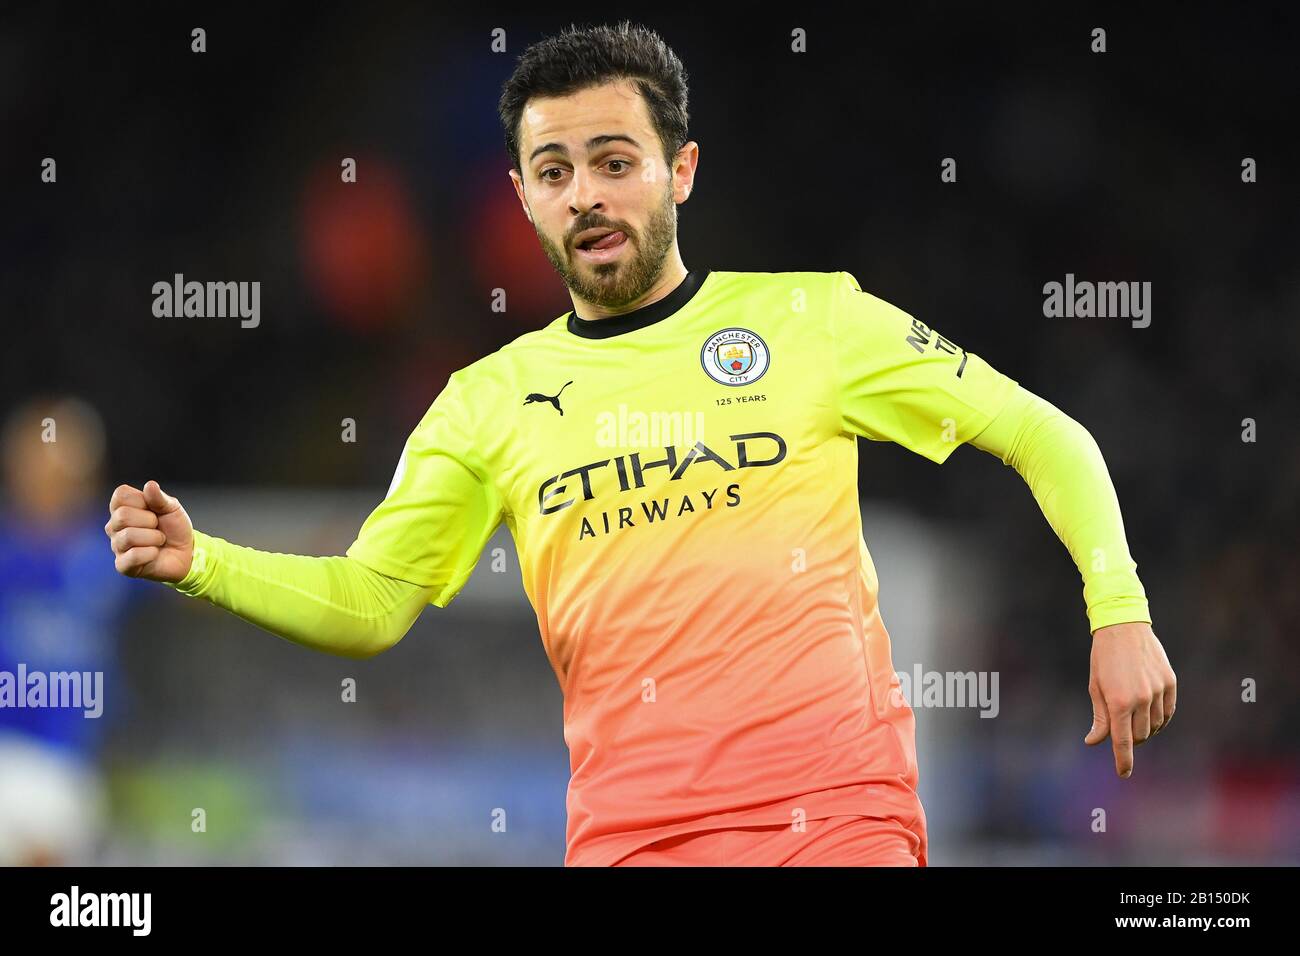 LEICESTER, ENGLAND - FEBRUARY 22ND Bernardo Silva (20) of Manchester City during the Premier League match between Leicester City and Manchester City at the King Power Stadium, Leicester on Saturday 22nd February 2020. (Credit: Jon Hobley | MI News) Photograph may only be used for newspaper and/or magazine editorial purposes, license required for commercial use Credit: MI News & Sport /Alamy Live News Stock Photo